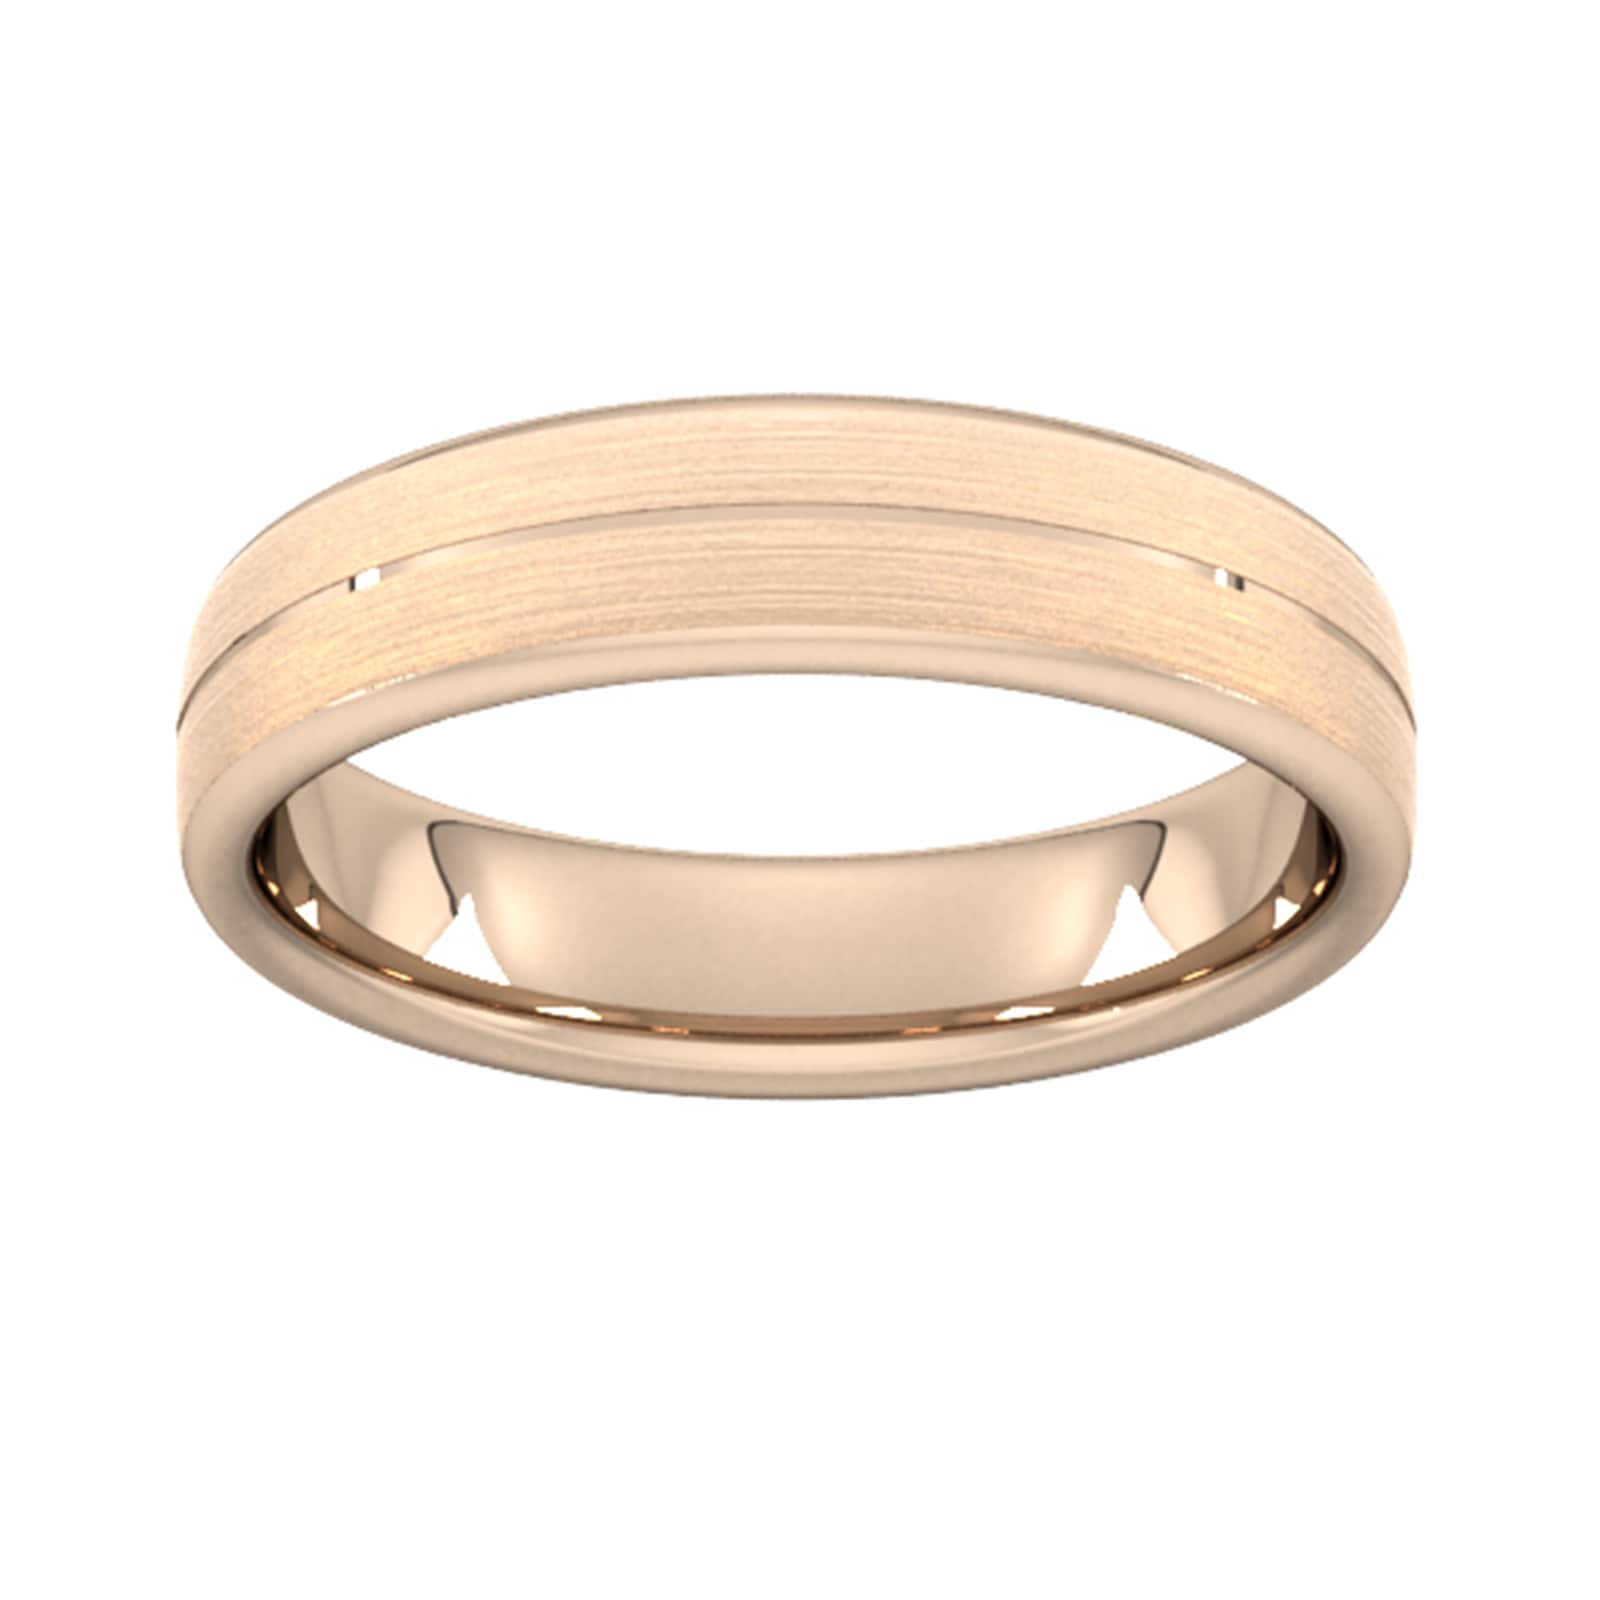 5mm Traditional Court Heavy Centre Groove With Chamfered Edge Wedding Ring In 18 Carat Rose Gold - Ring Size U